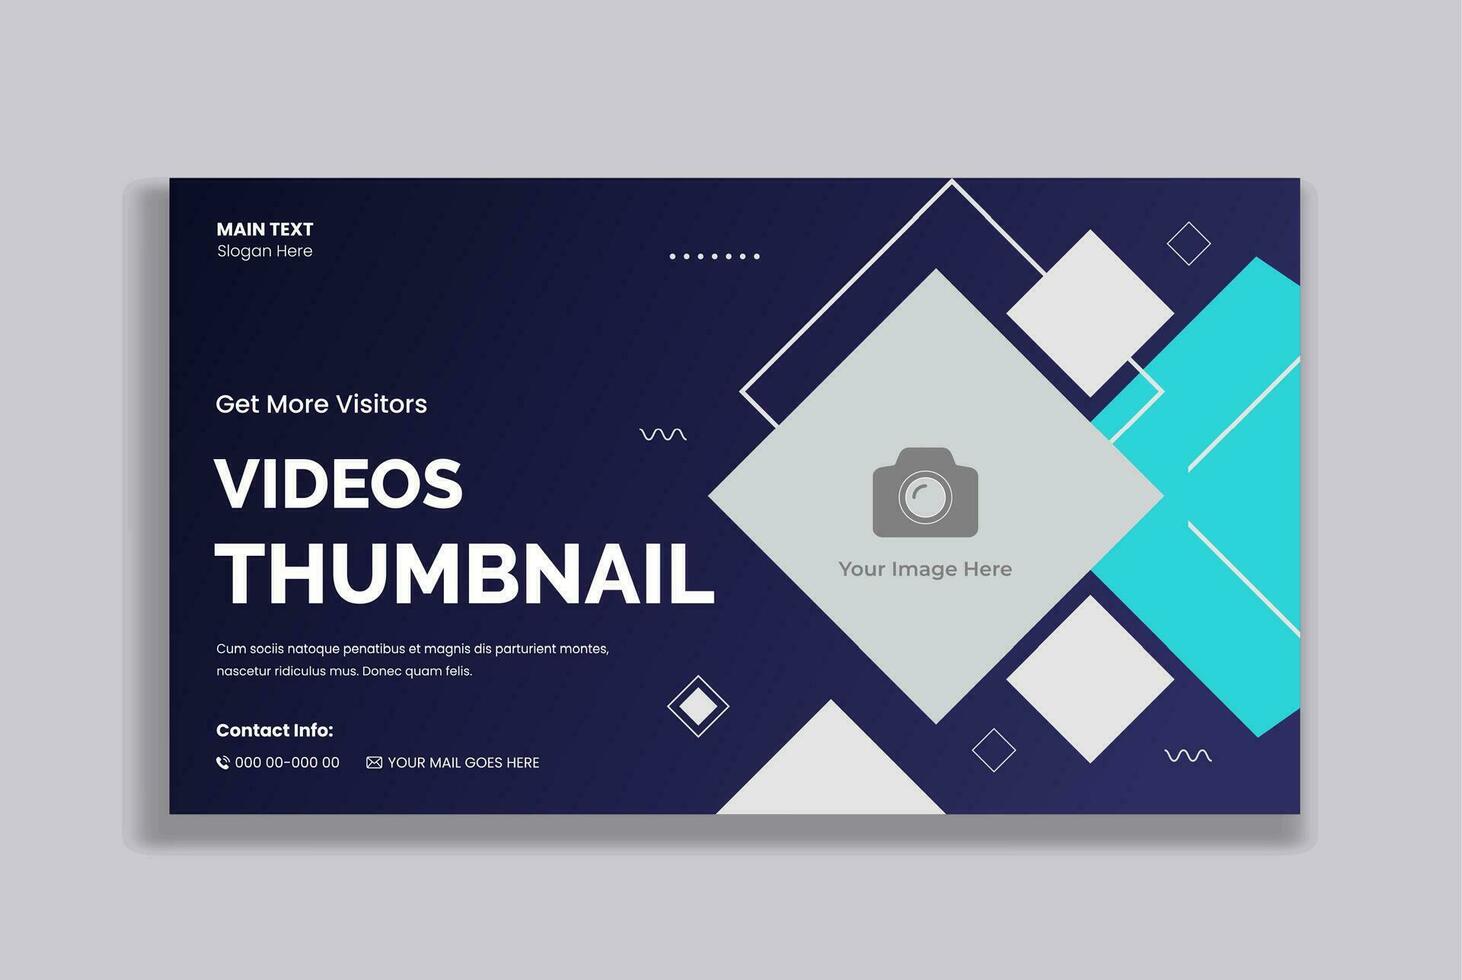 Video thumbnail design for opening video tutorials. Customizable thumbnail for live podcast and business webinar vector